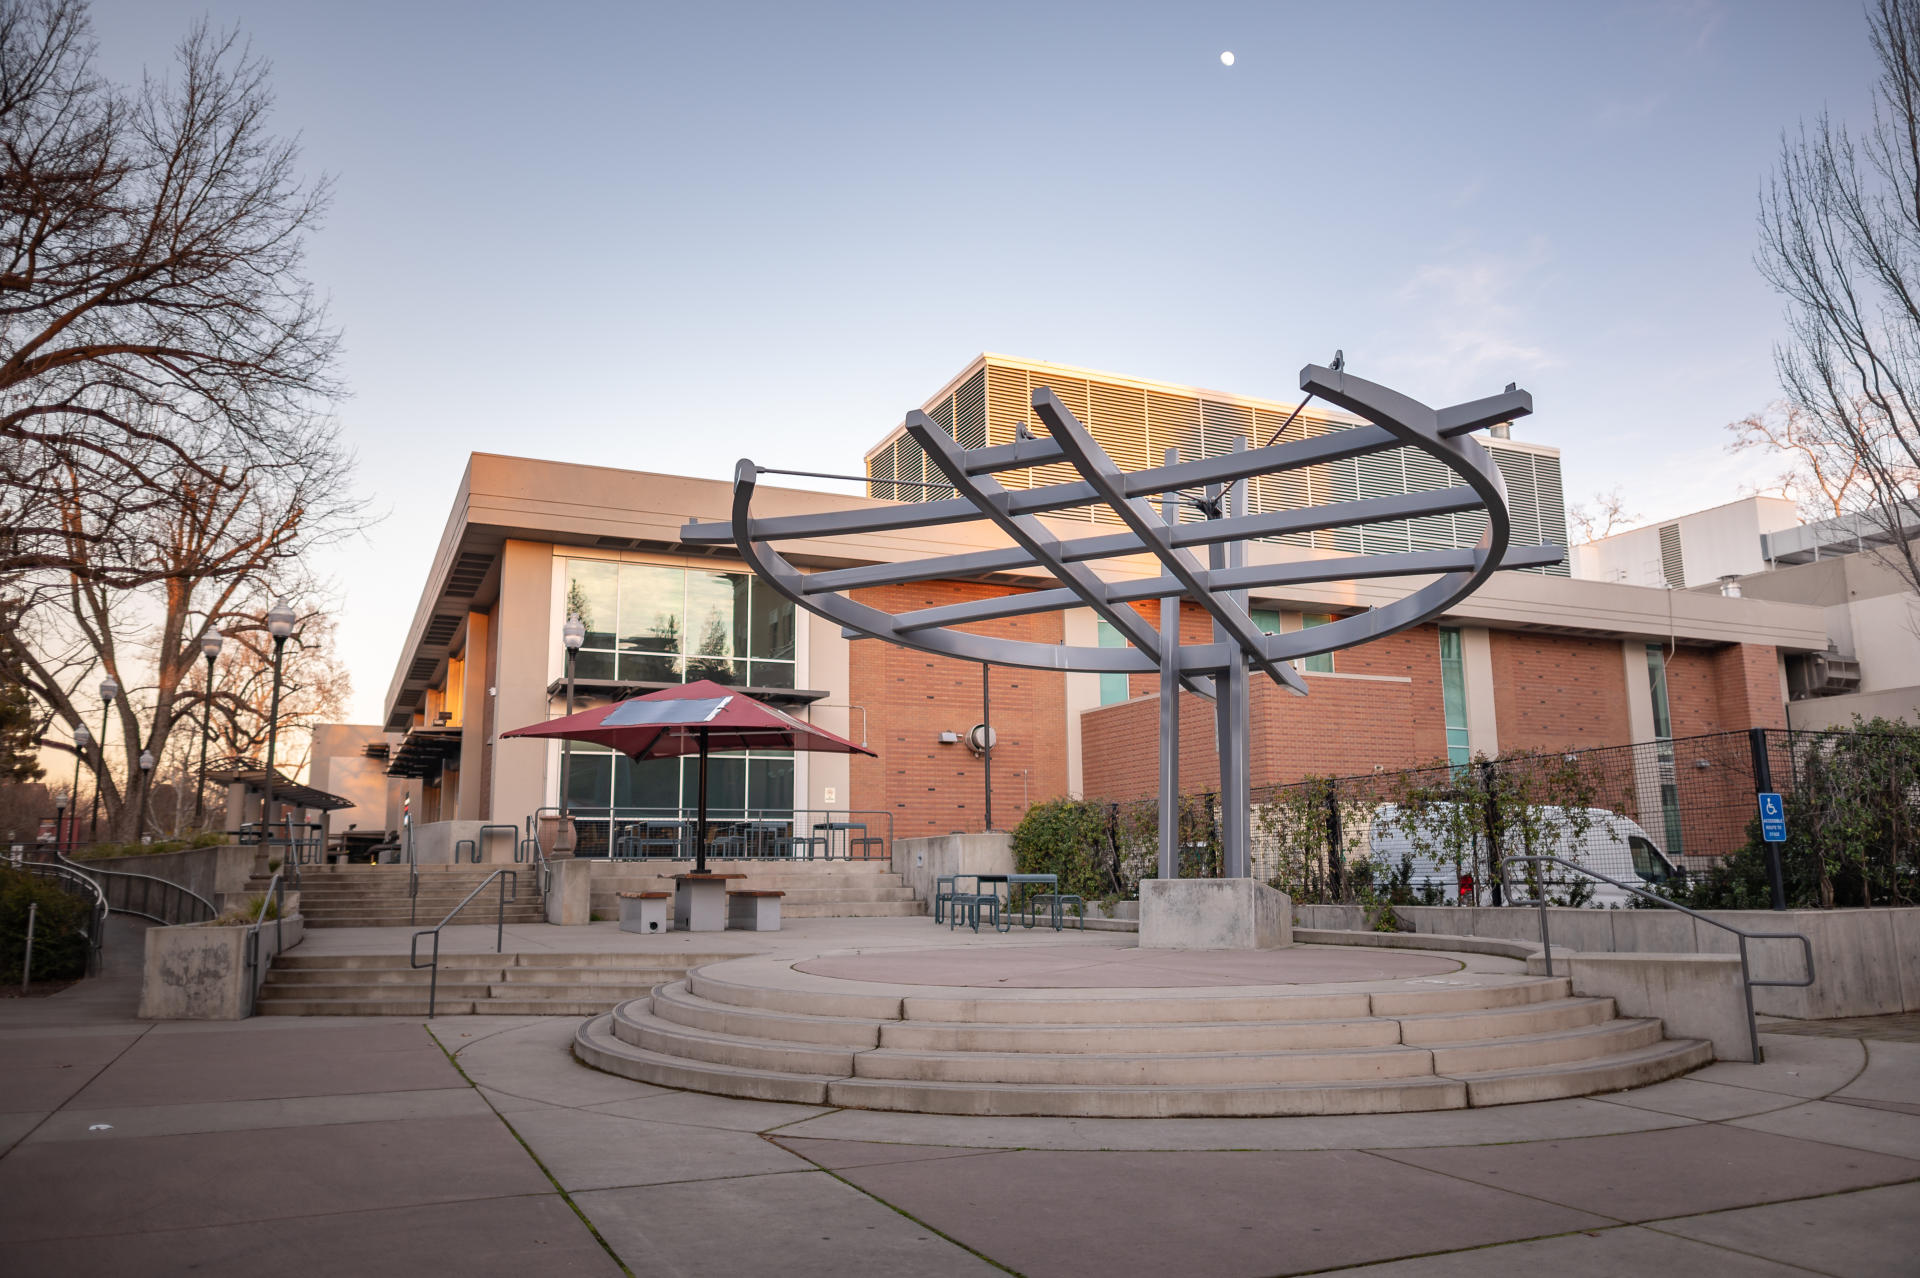 A stylish structure stands on an elevated surface outside a building on a college campus.